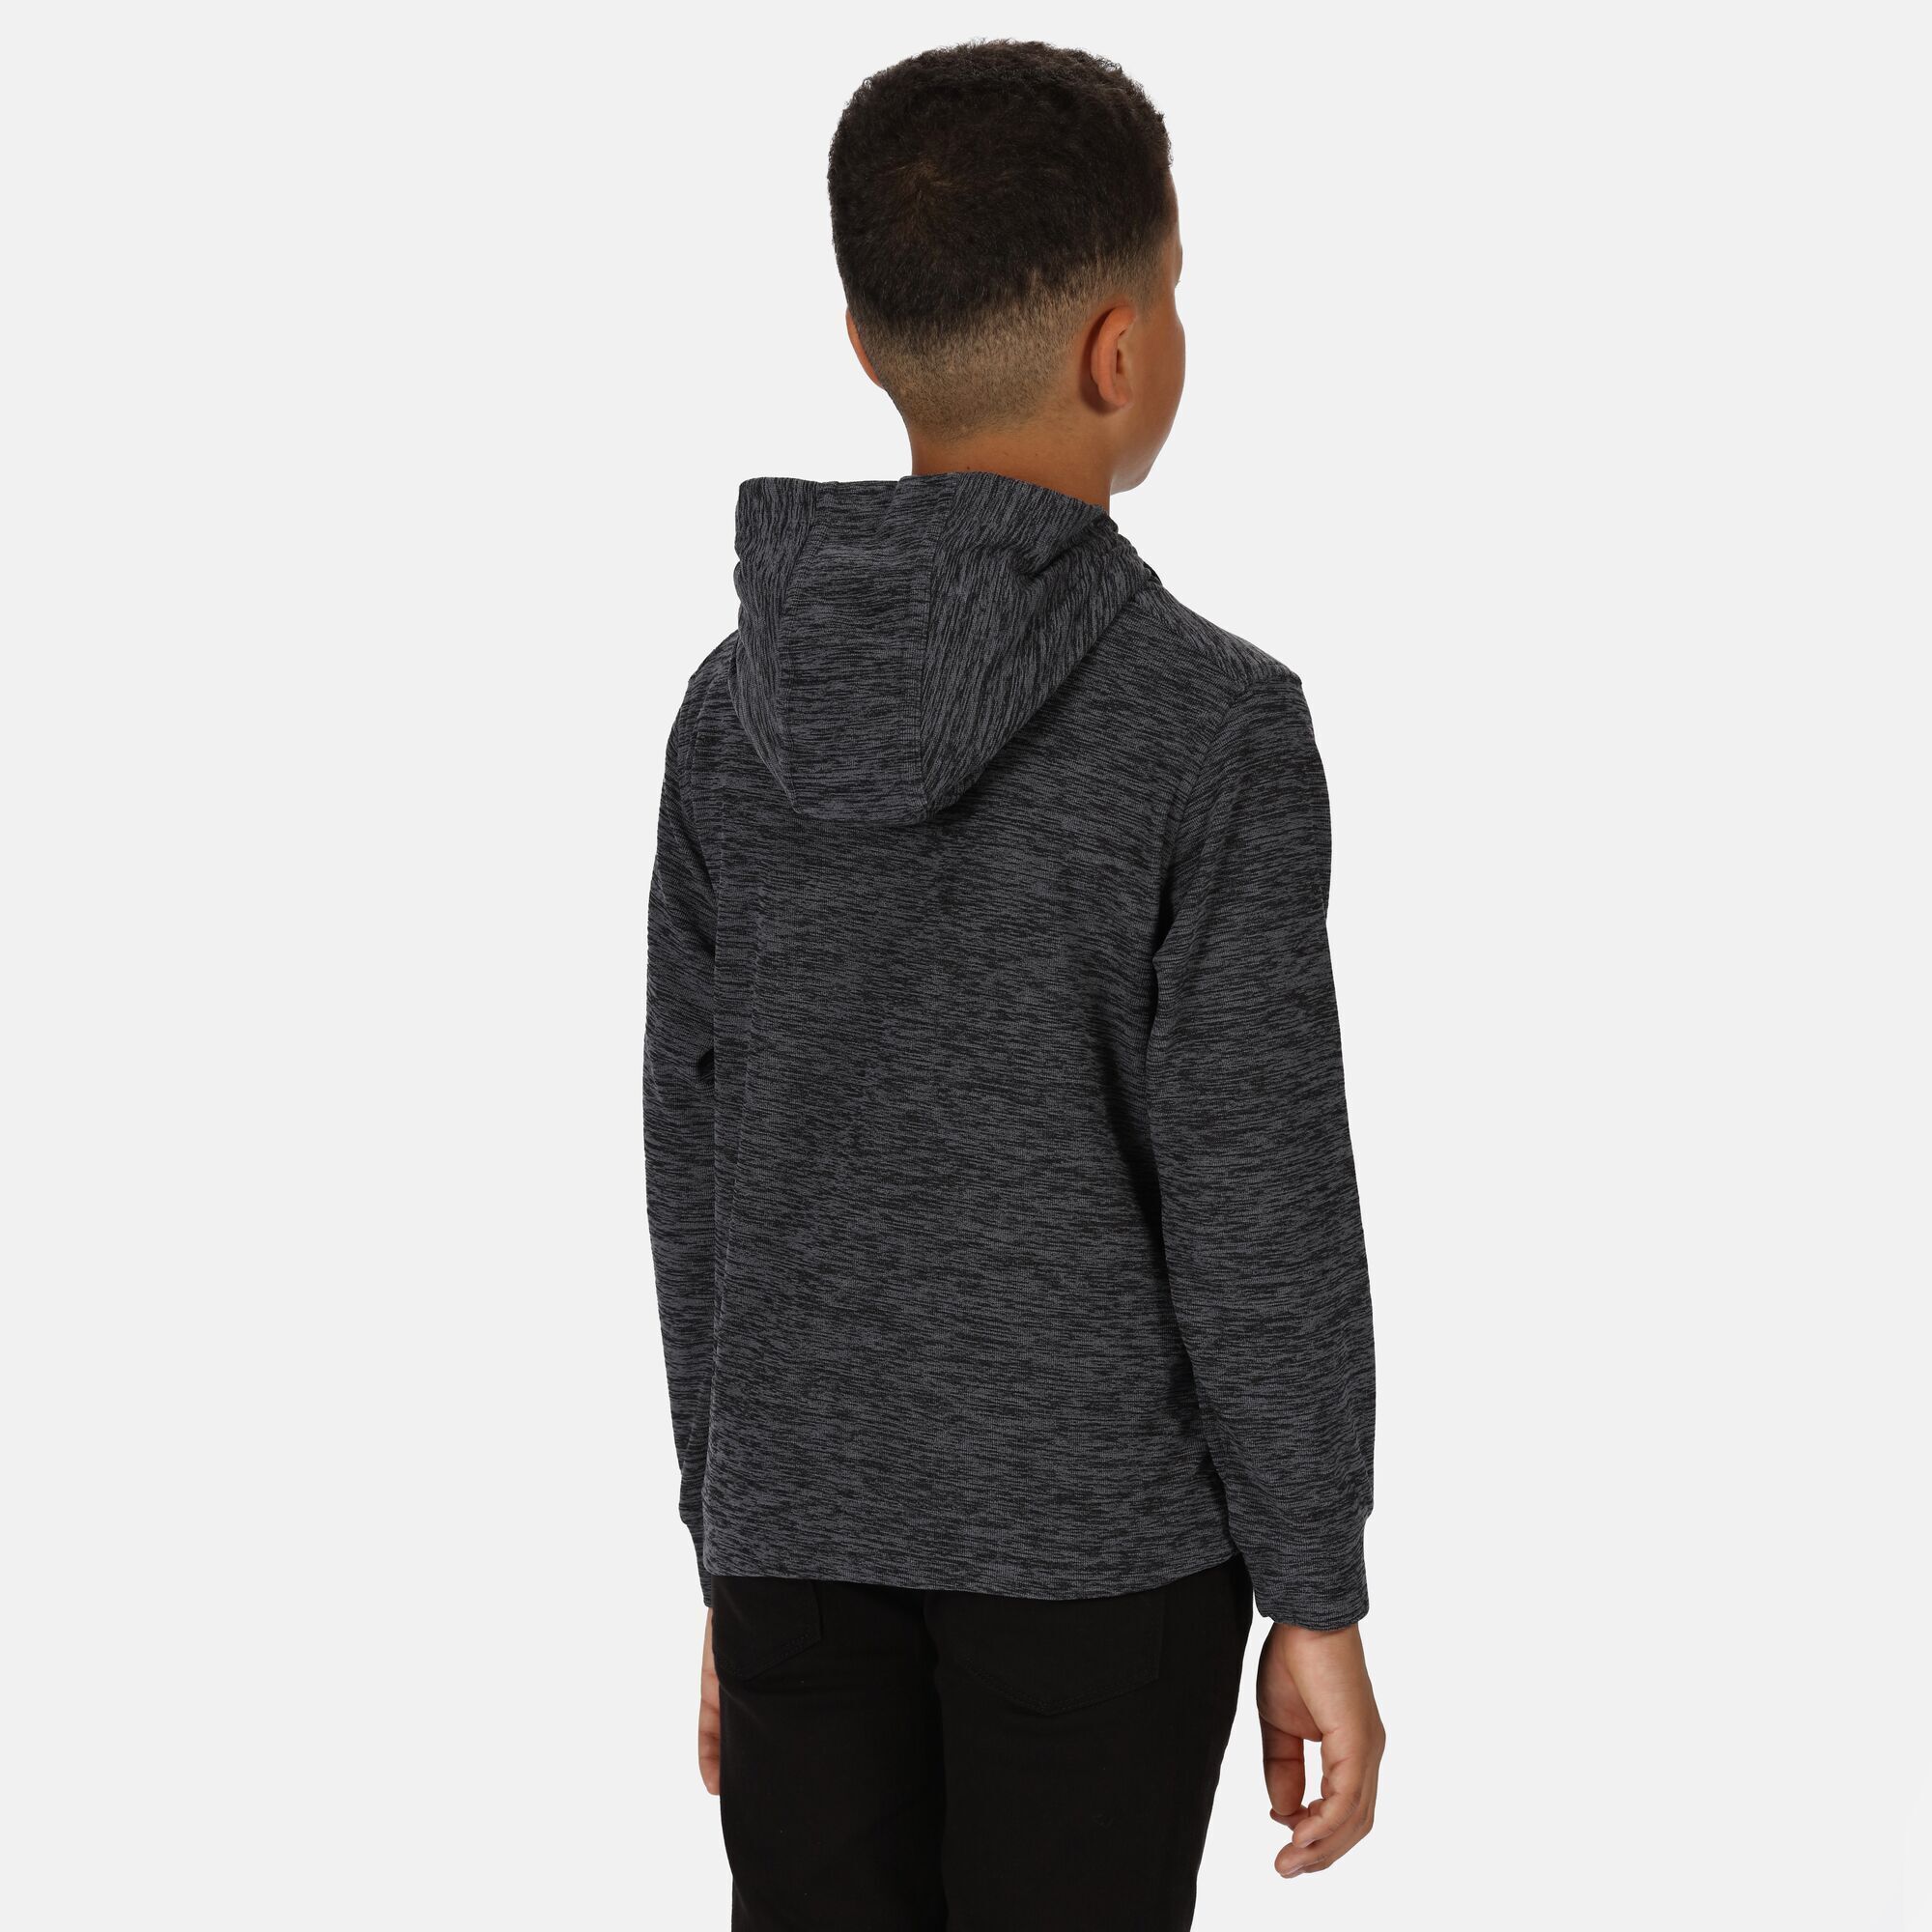 Material: 100% polyester. Polyester marl towelling fabric. Grown on hood with wrap over construction. Decorative drawcord at hood 7-8 years and up. 2 lower pockets. Chest sizes to fit: (3-4 Yrs): 55-57cm, (5-6 Yrs): 59-61cm, (7-8 Yrs): 63-67cm, (9-10 Yrs): 69-73cm, (11-12 Yrs): 75-79cm, (13 Yrs): 82cm, (14 Yrs): 86cm, (15-16 Yrs): 89-92cm.